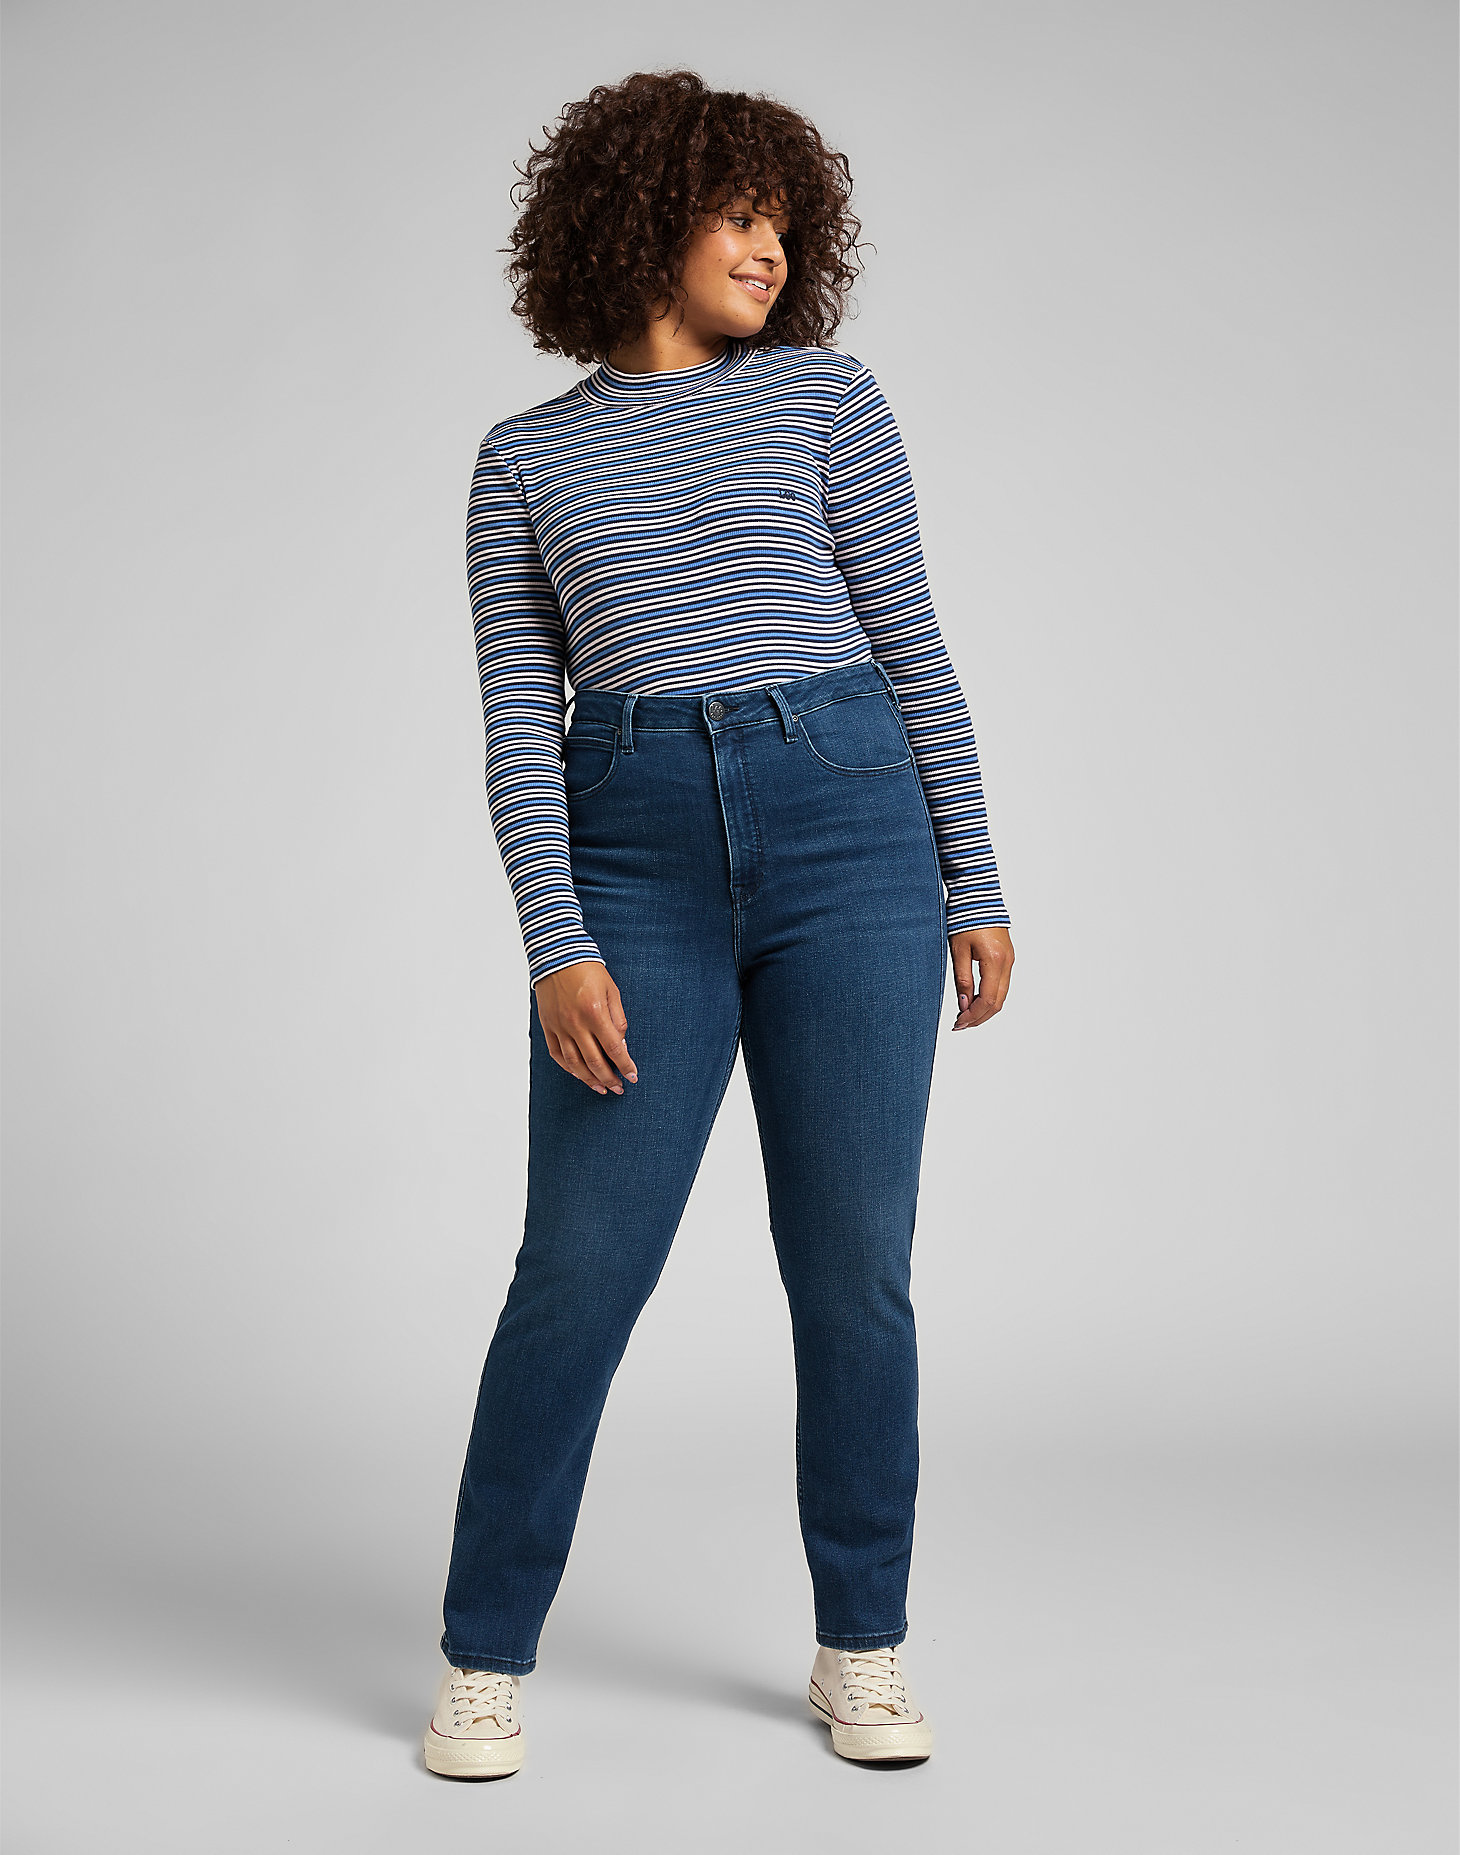 Ribbed Long Sleeve Striped Tee in Blue Yonder alternative view 2